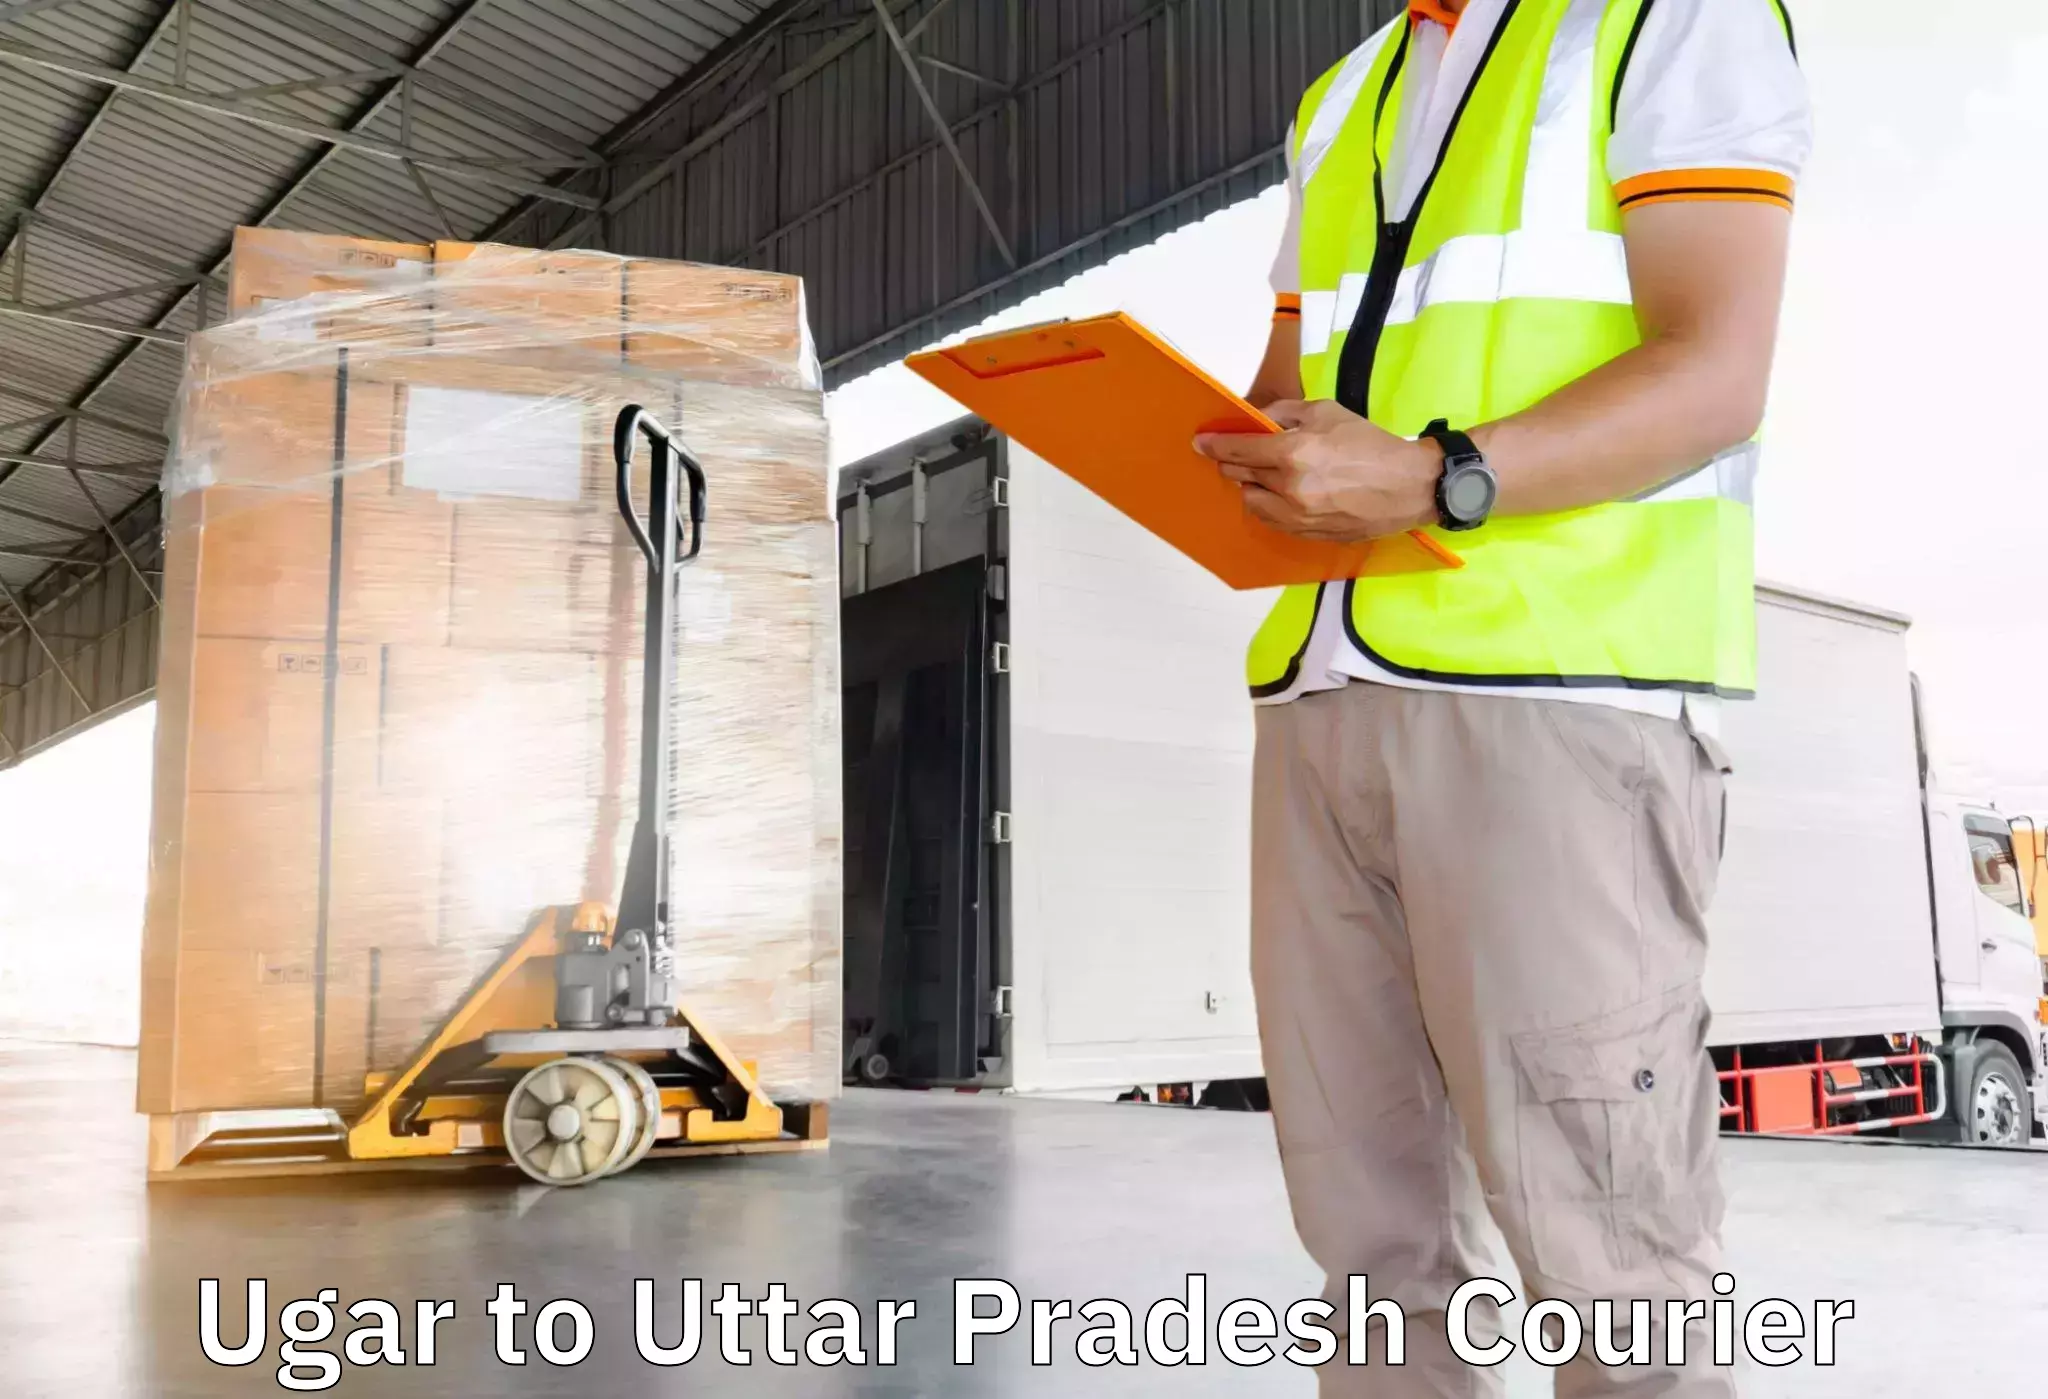 Professional moving assistance Ugar to Ratanpura